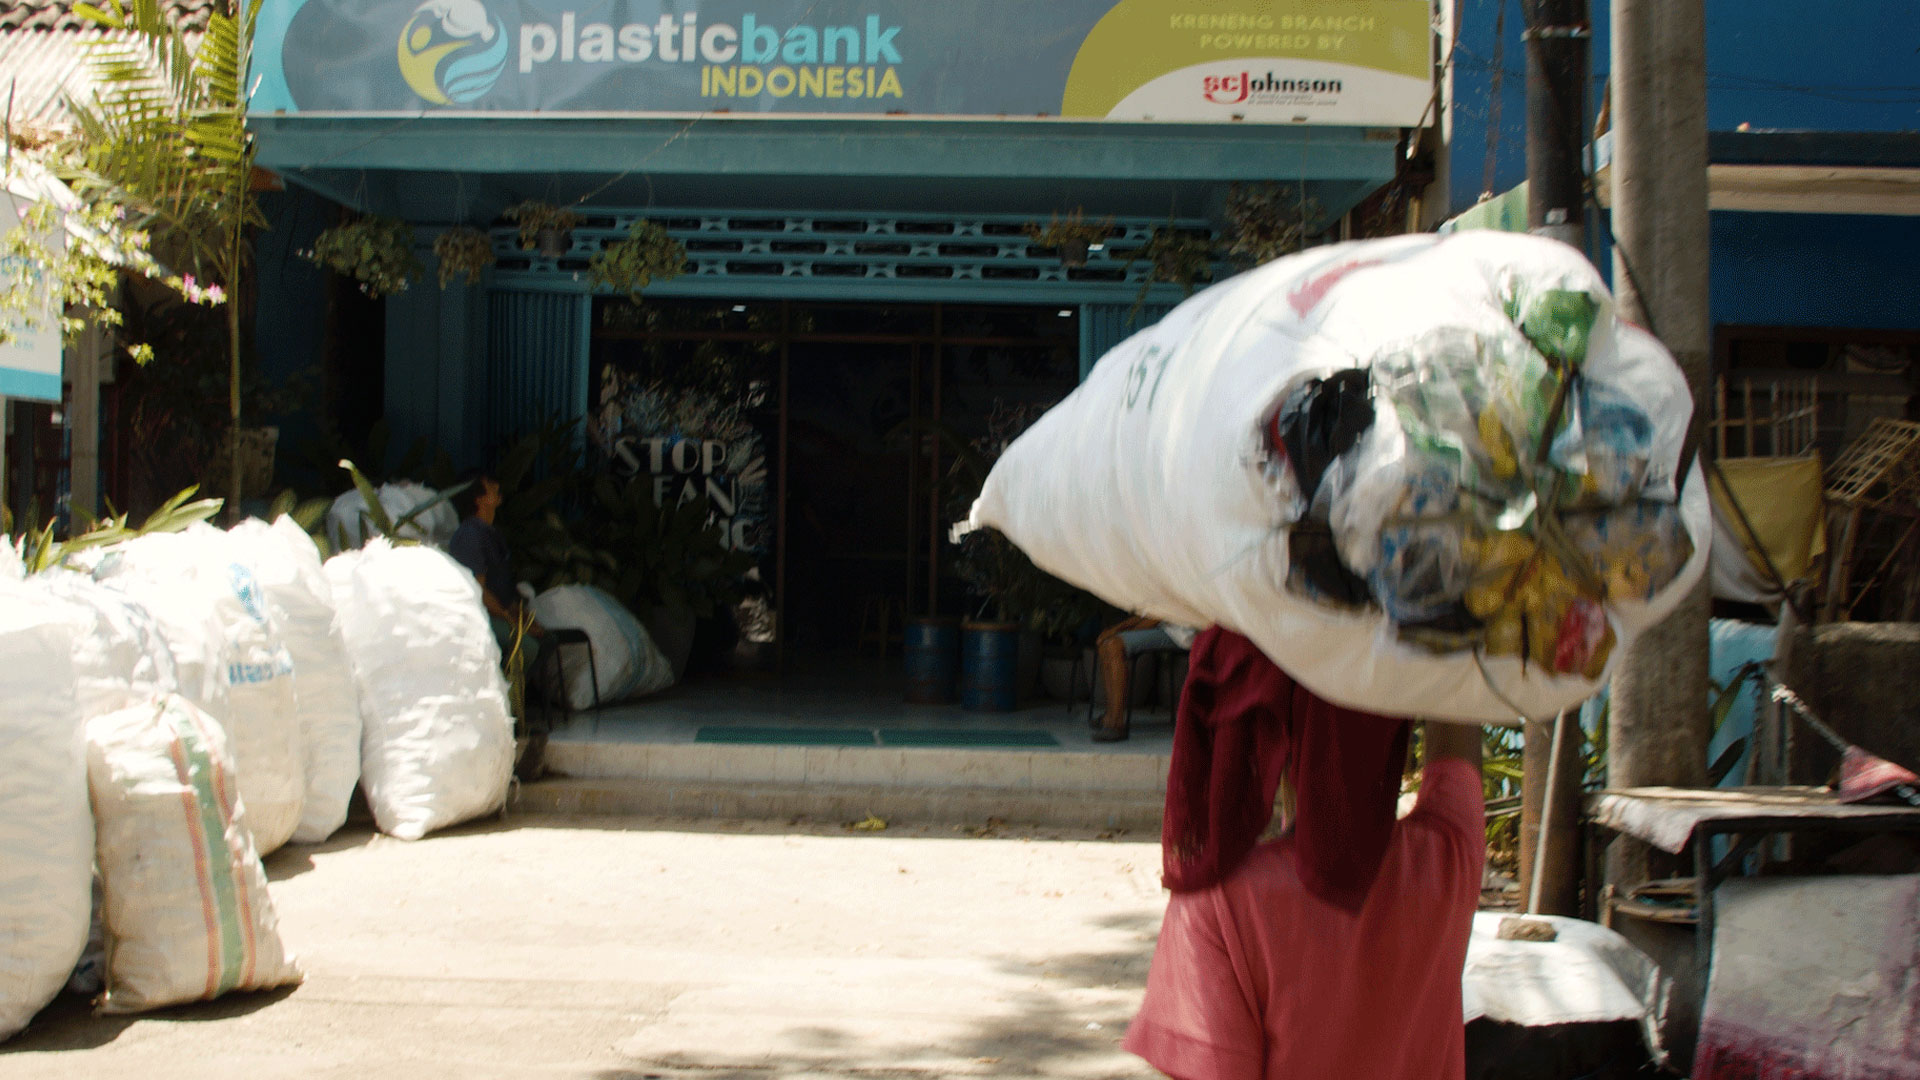 Plastic Bank collection center